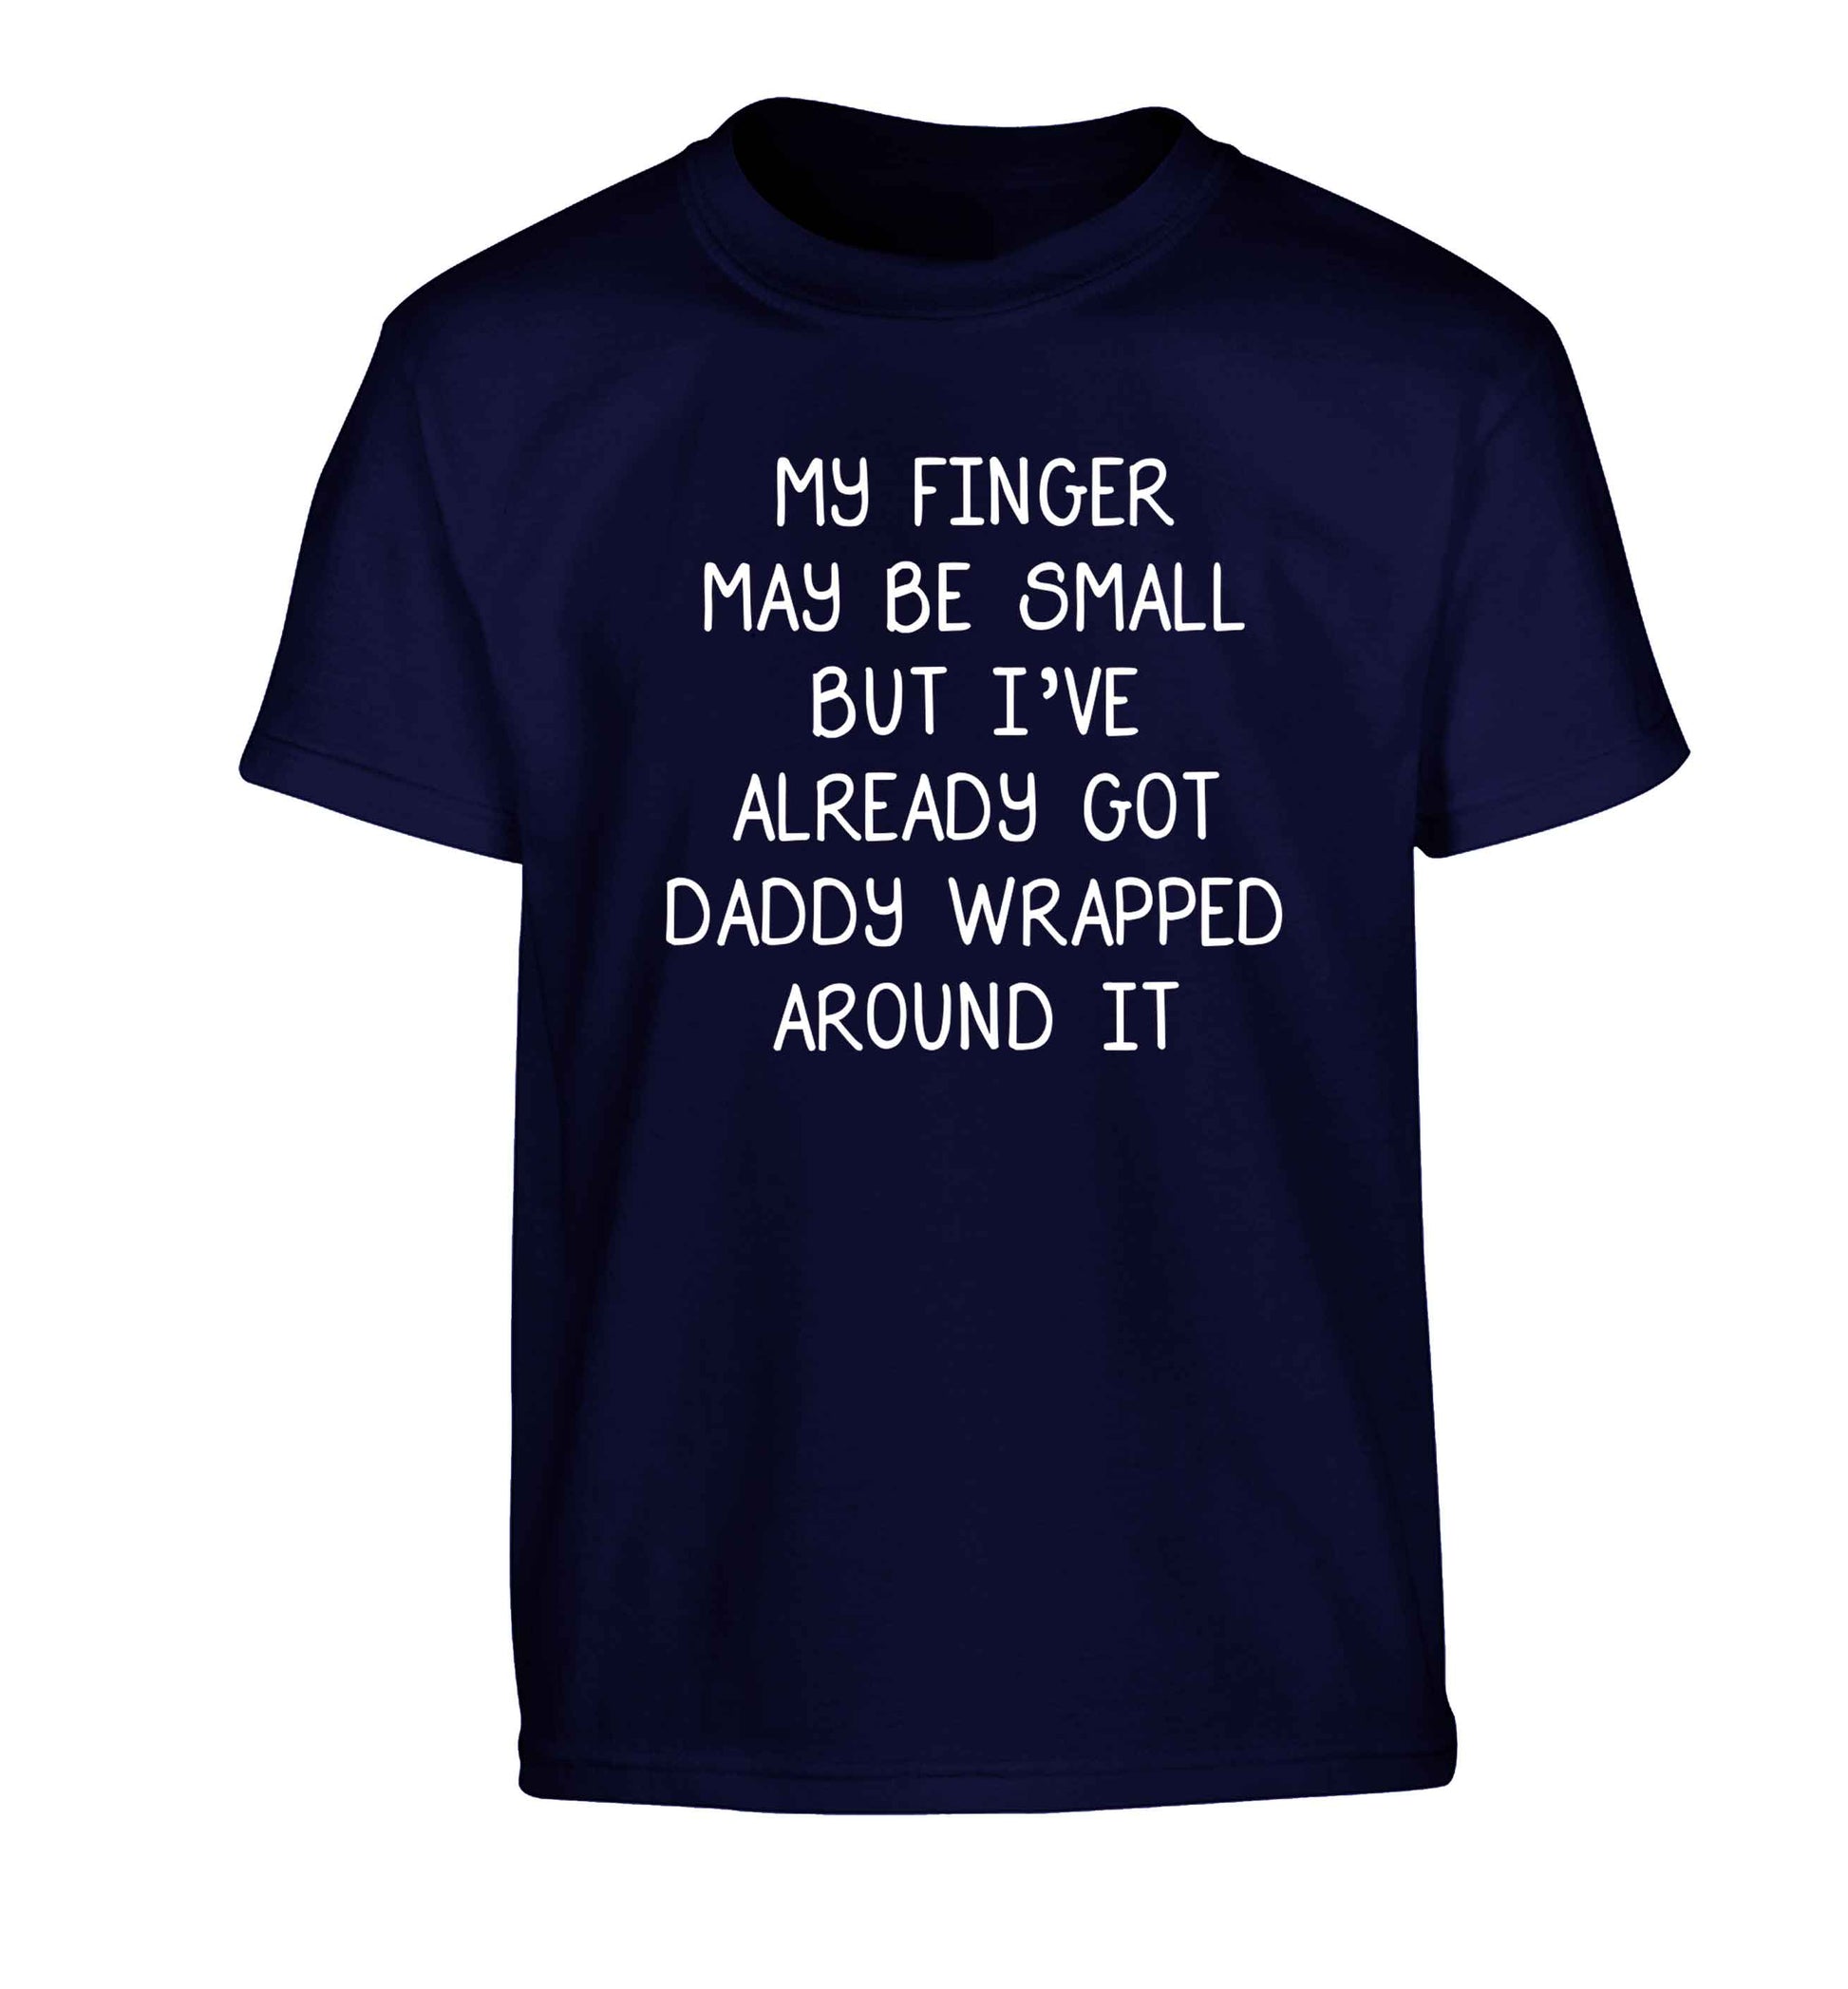 My finger may be small but I've already got daddy wrapped around it Children's navy Tshirt 12-13 Years